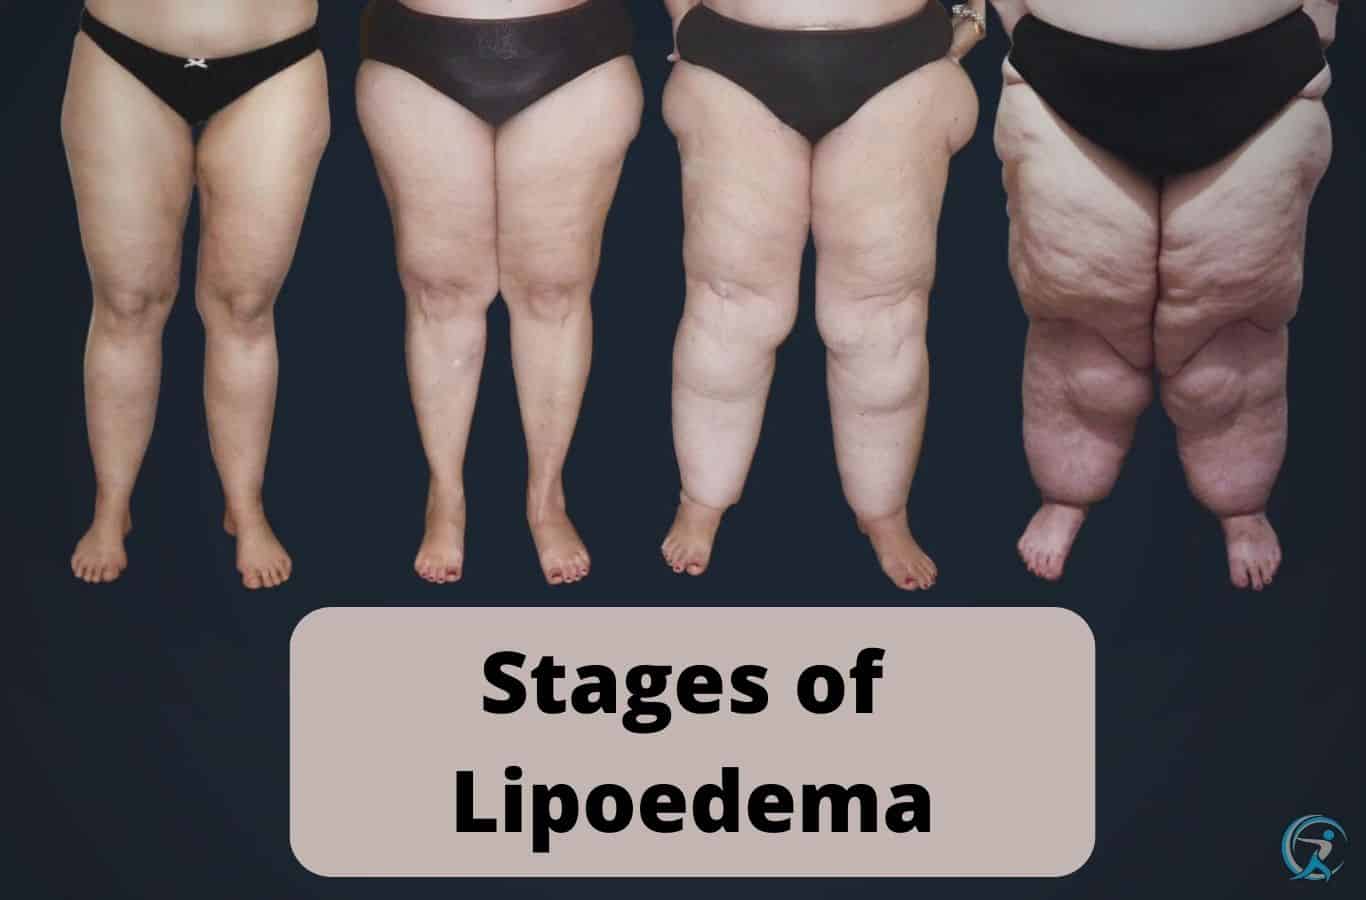 Treating Lipoedema and Getting Rid Of Excess Fat